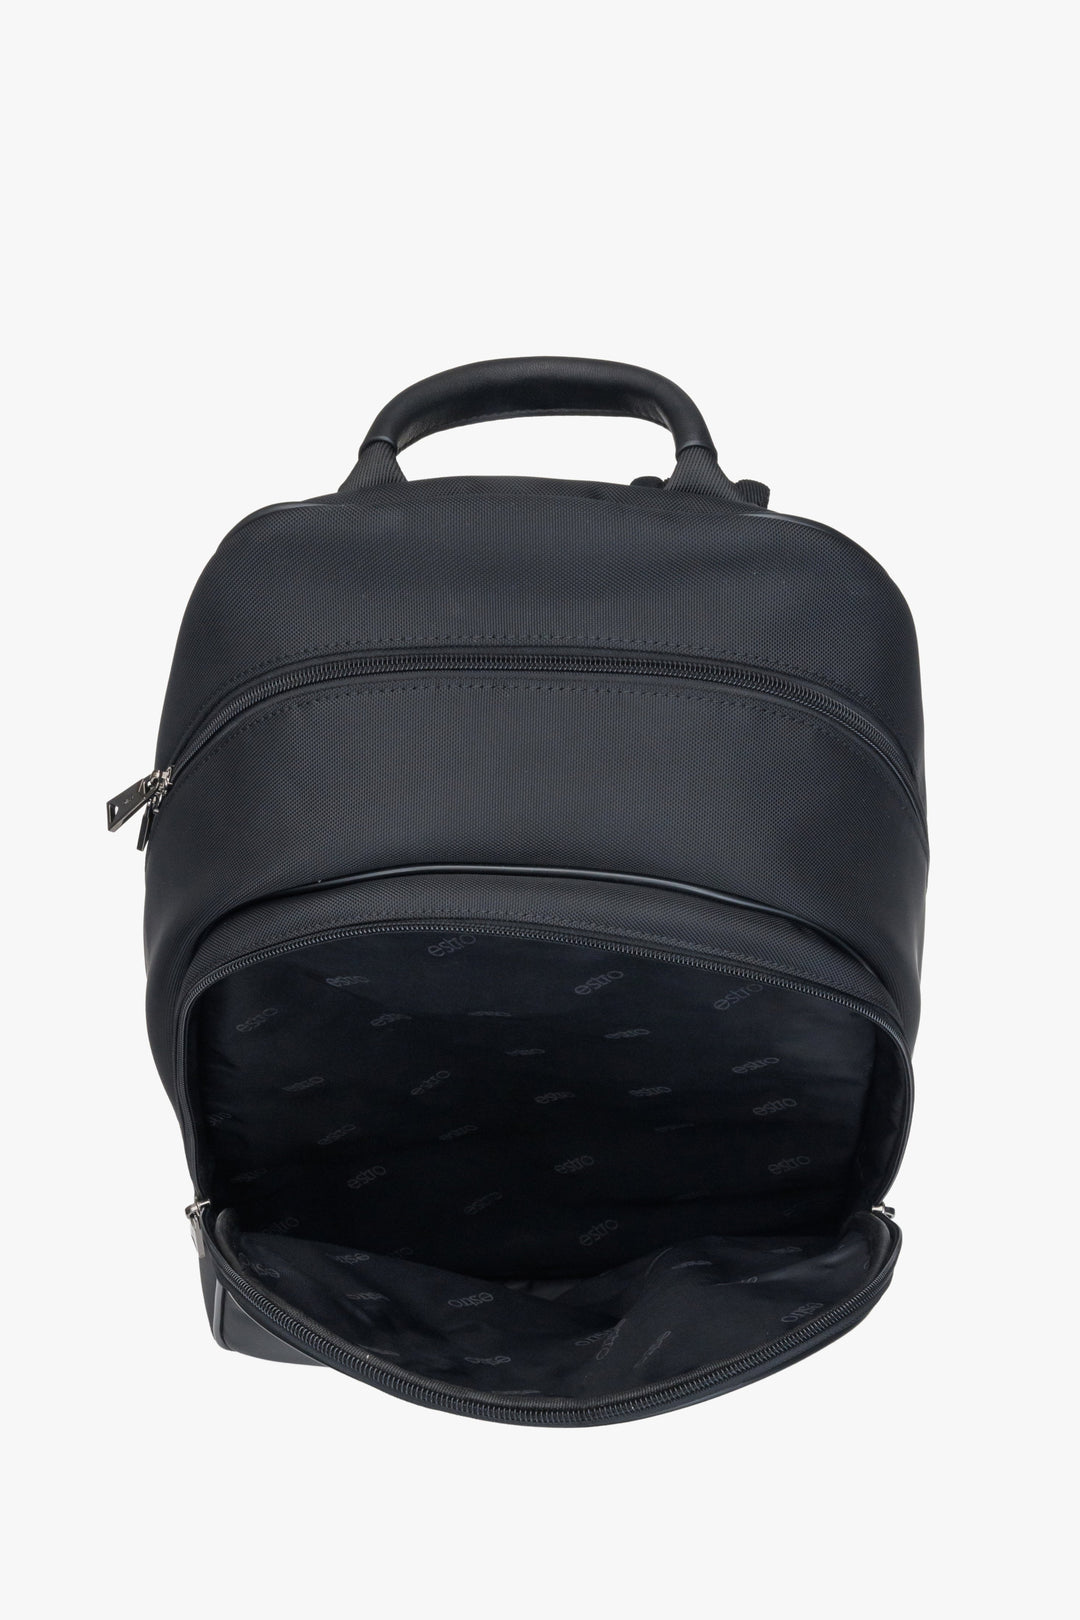 Urban men's  black backpack by Estro - close-up on the interior of the backpack.